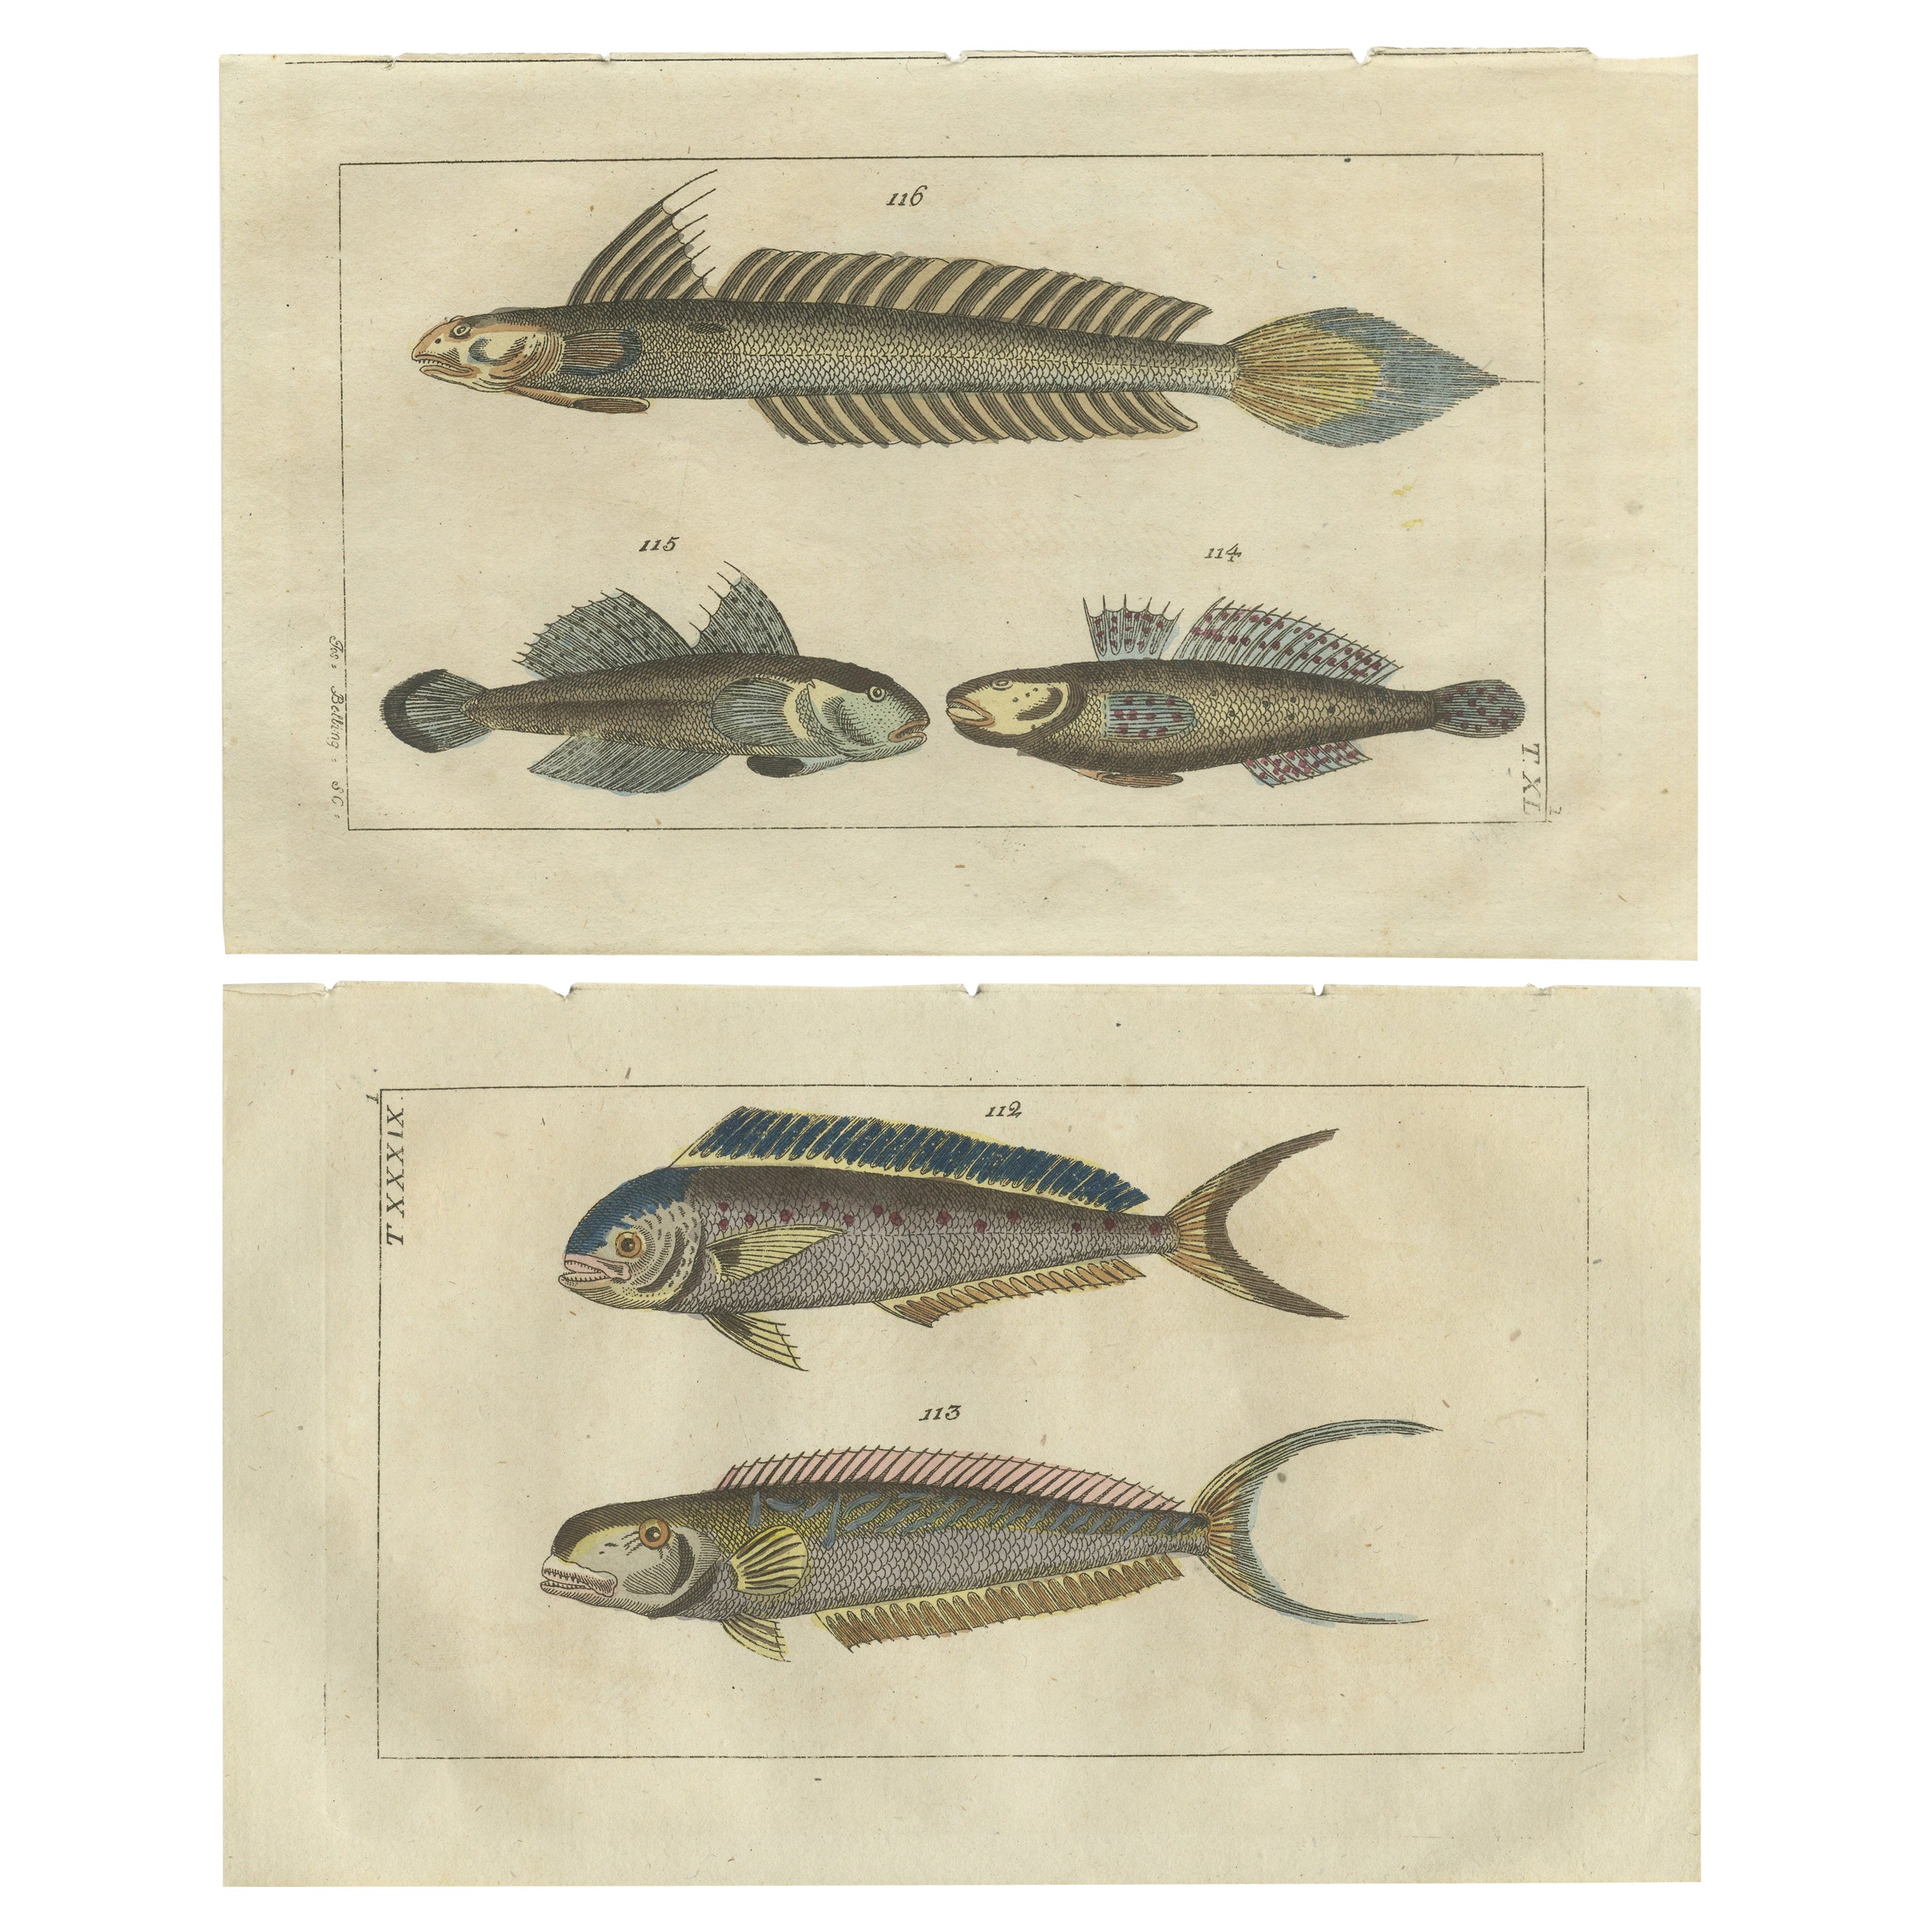 Set of 2 Antique Fish Prints - Dolphin Fish - Goby - Sand Tilefish